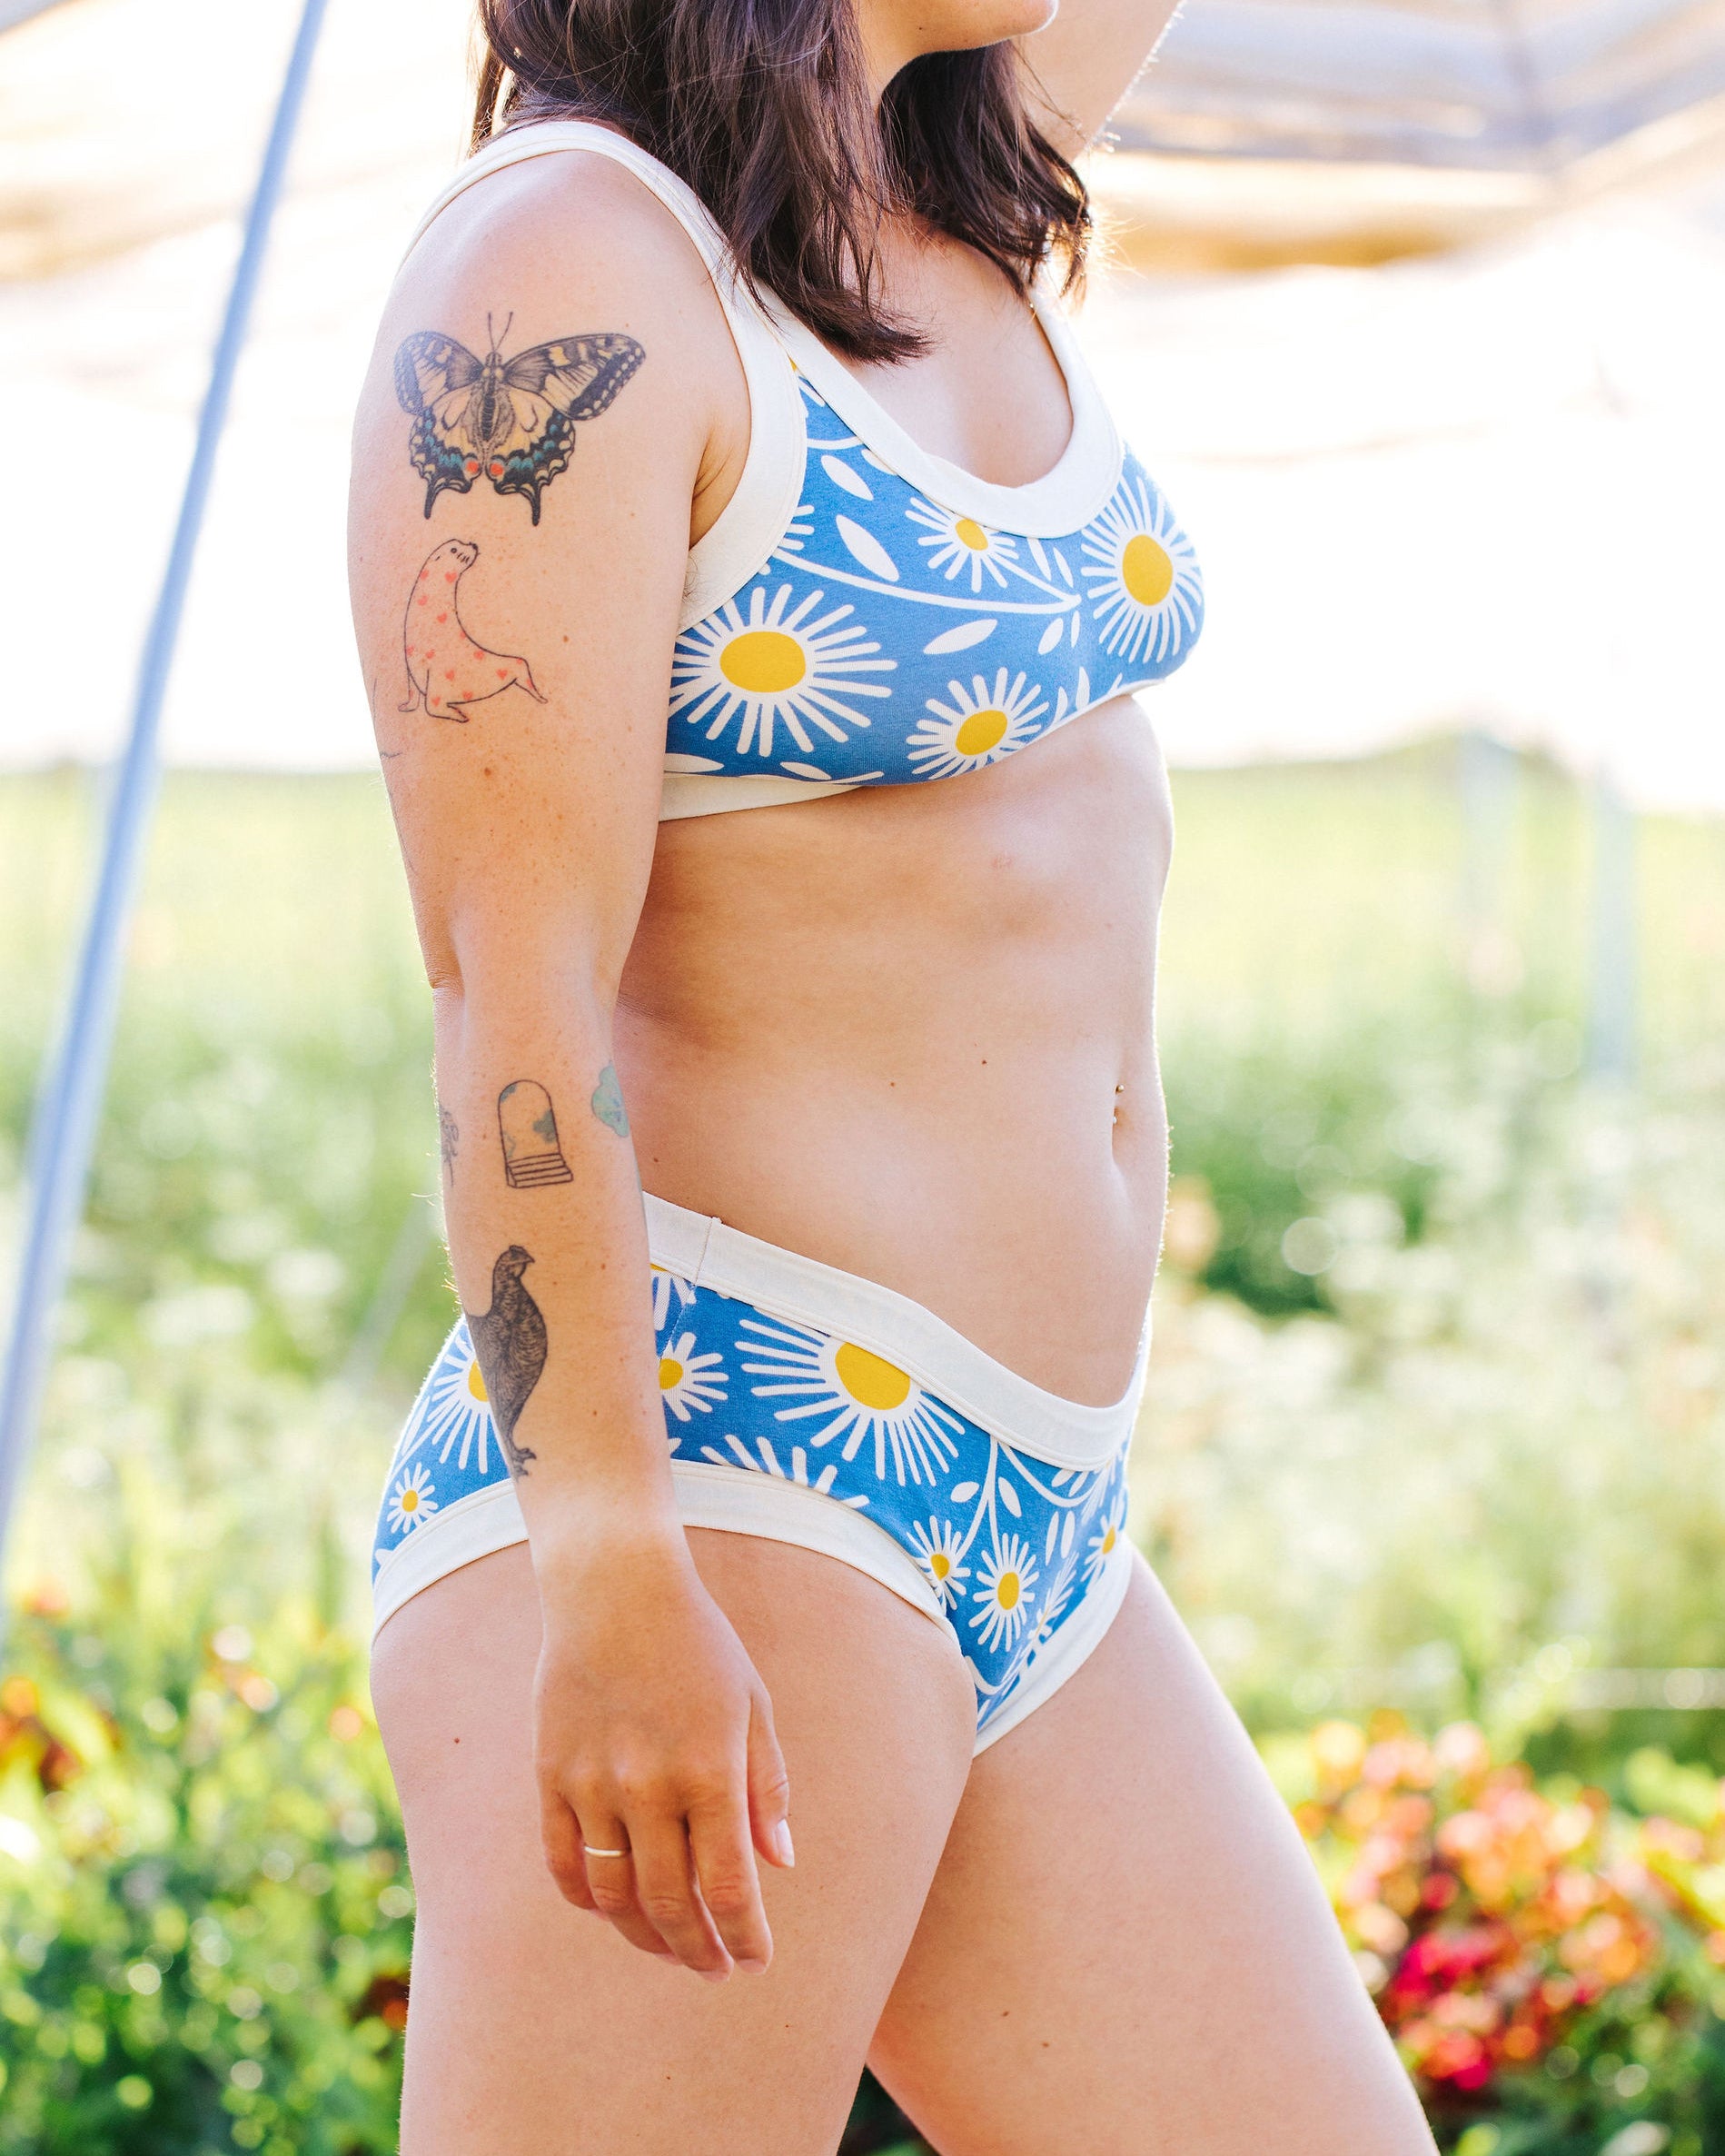 Close up of model standing in a field wearing Thunderpants Hipster style underwear and Bralette in Daisy Days print: blue with white and yellow daisies.